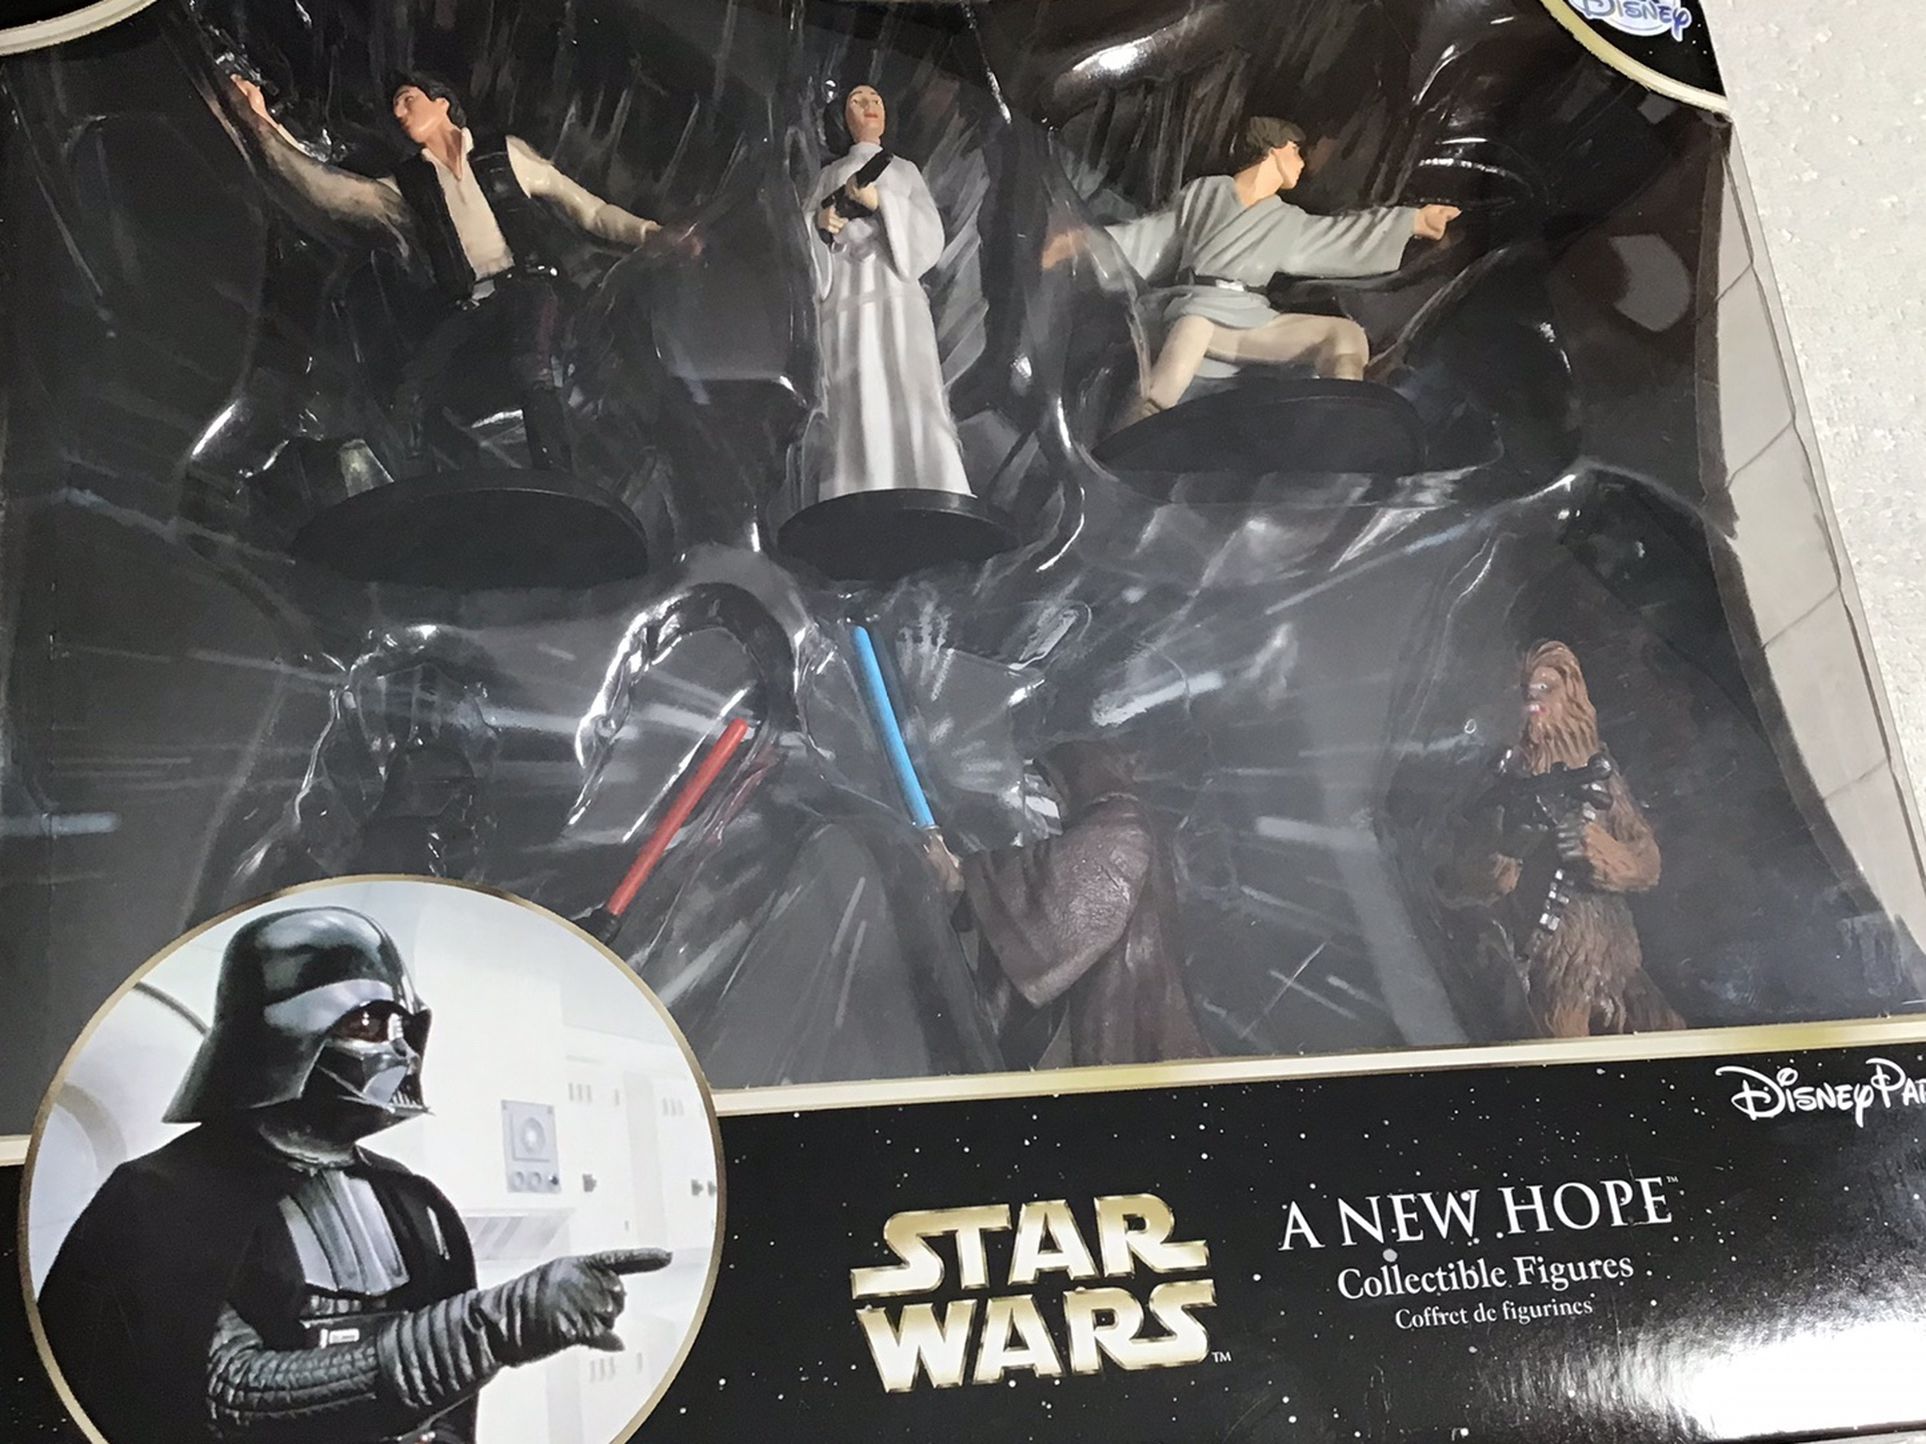 DISNEY EXCLUSIVE STAR WARS A NEW HOPE COLLECTIBLE FIGURES